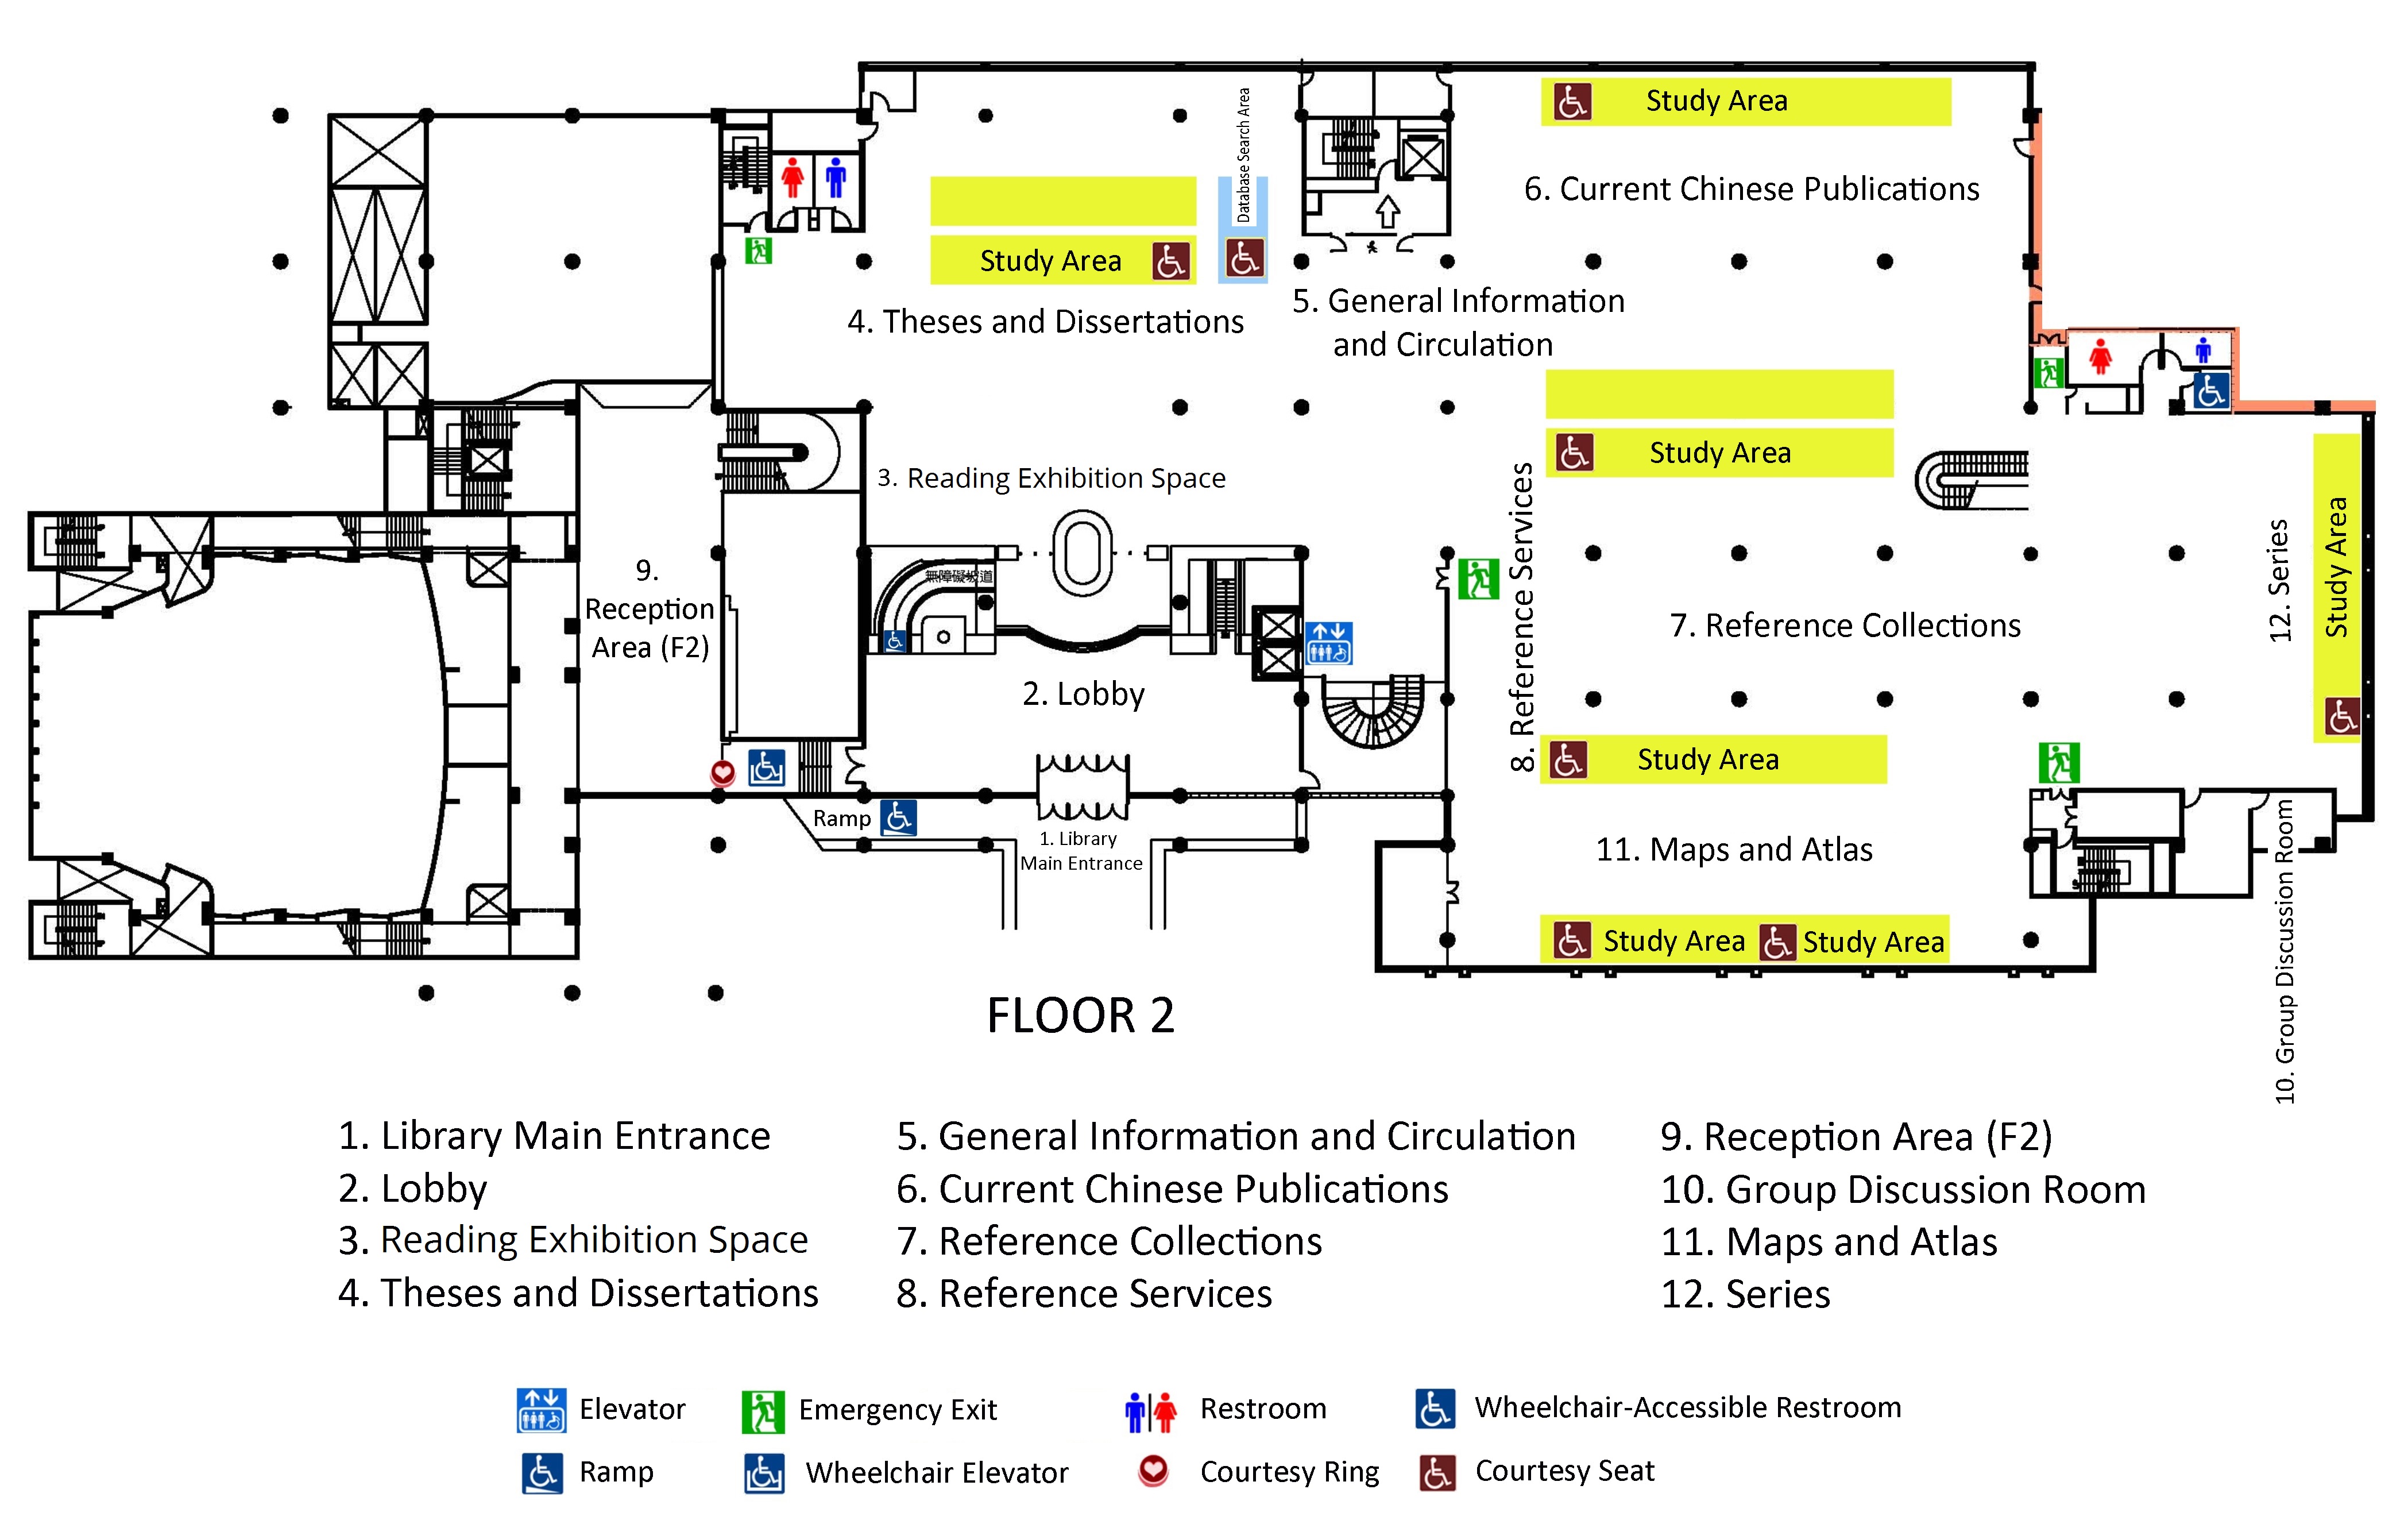 Floor Layout of NCL Main Library-2F